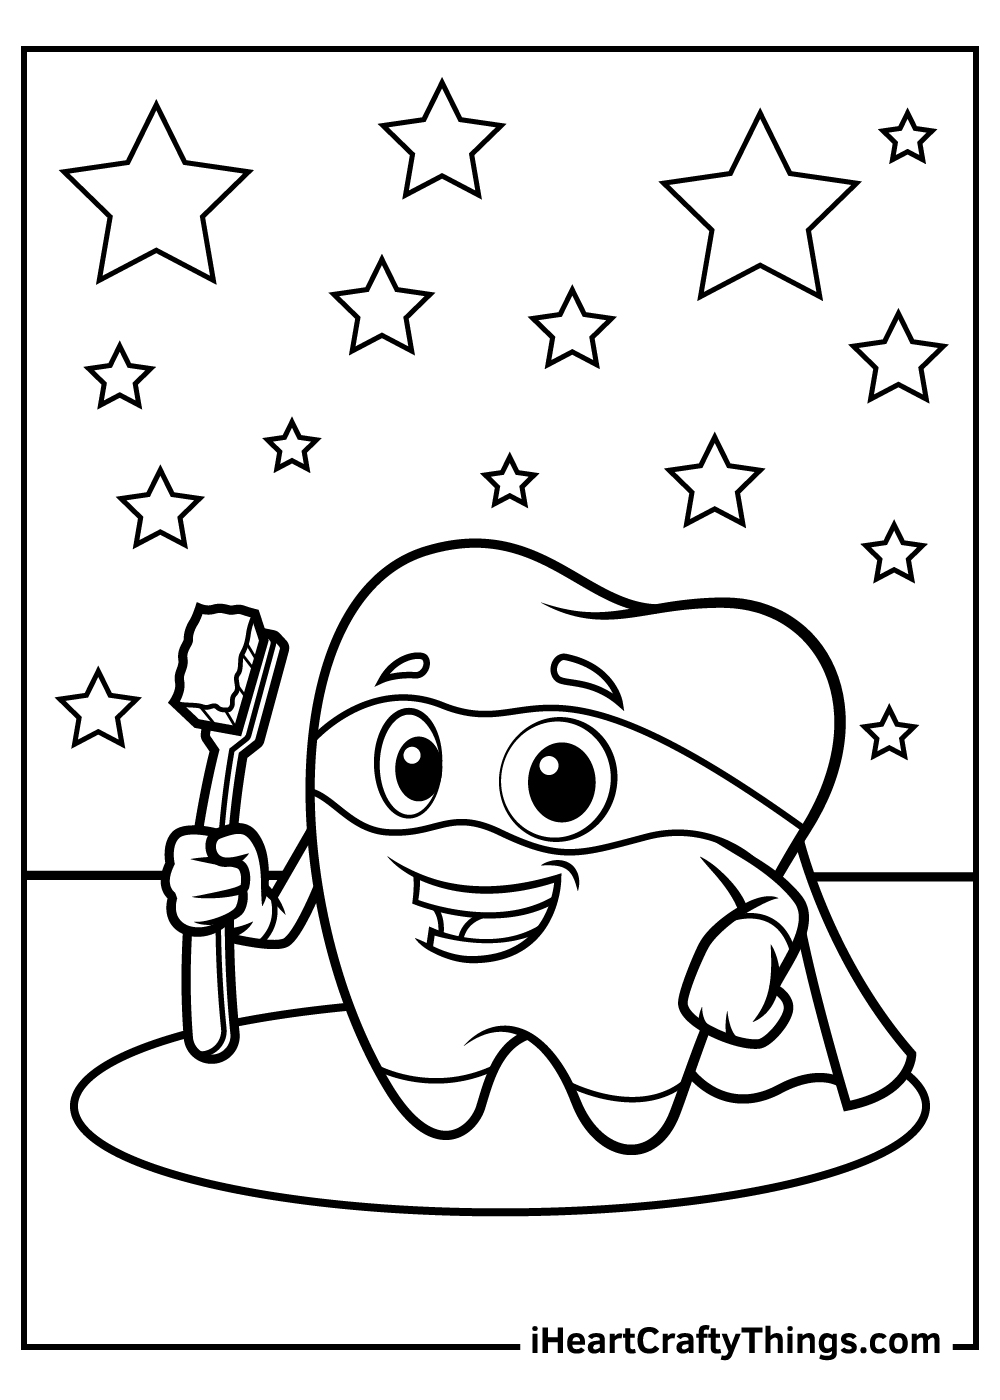 Tooth coloring pages free printables